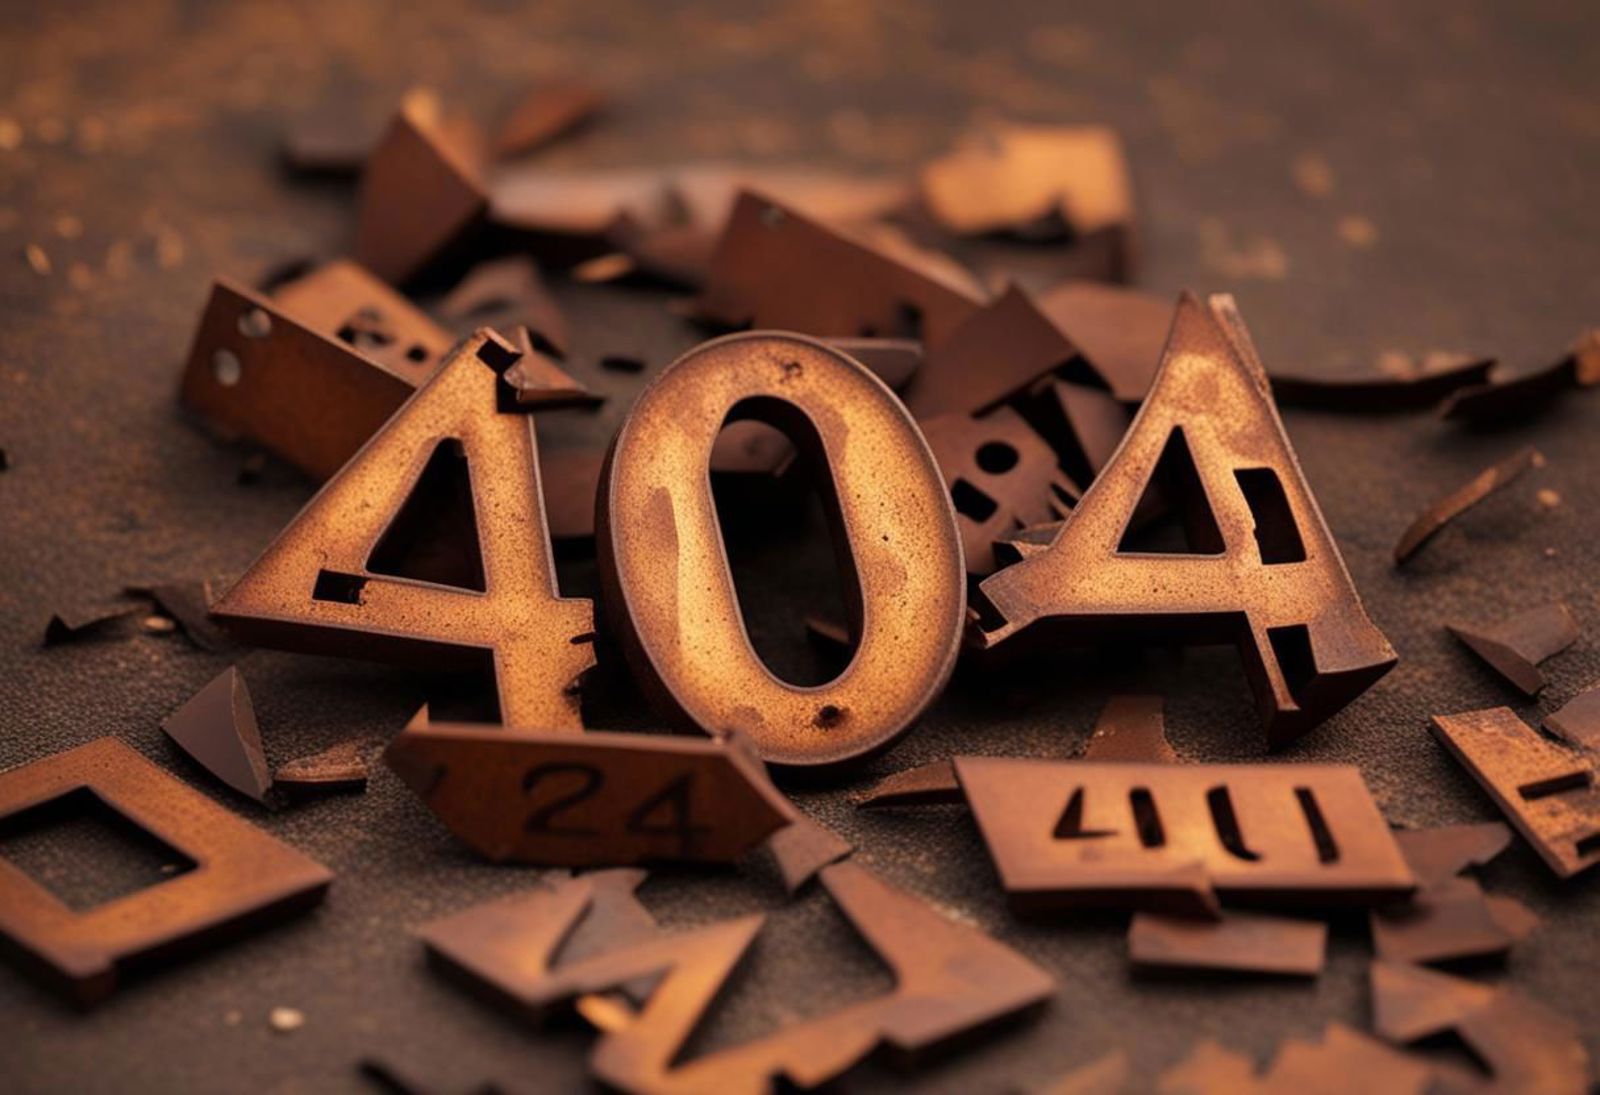 Old red and brown metal letter pieces forming the word "404" and "error" on a table.